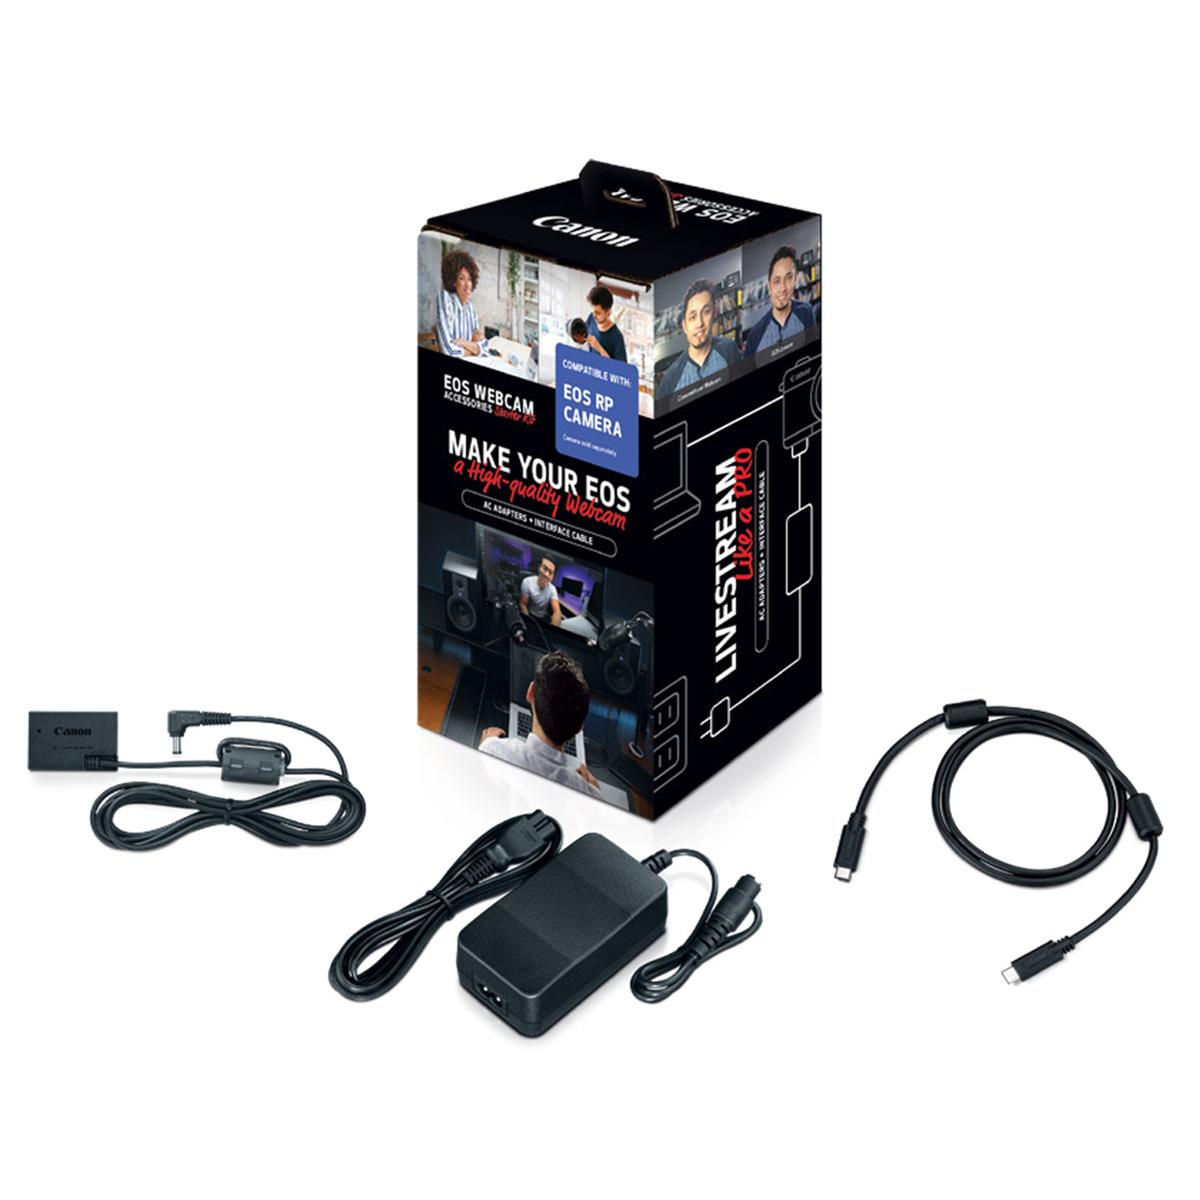 Image of Canon Webcam Accessories Starter Kit for EOS RP Camera